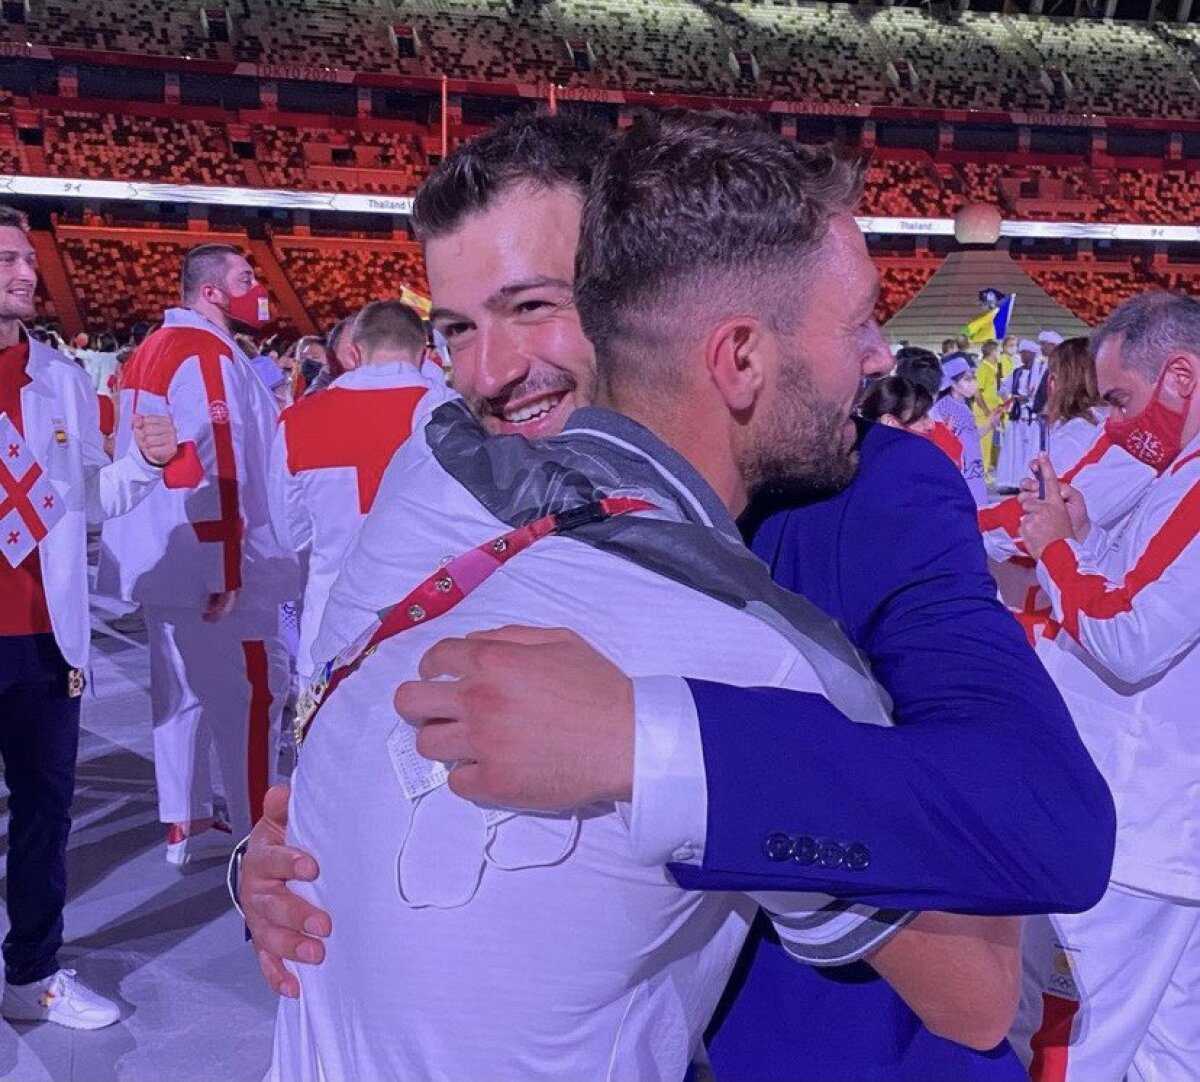 A photo circulating on social media shows brothers Muhammad and Alaa Masu embracing during the opening ceremony of the 2020 Tokyo Olympics on Friday, 7/23/2021